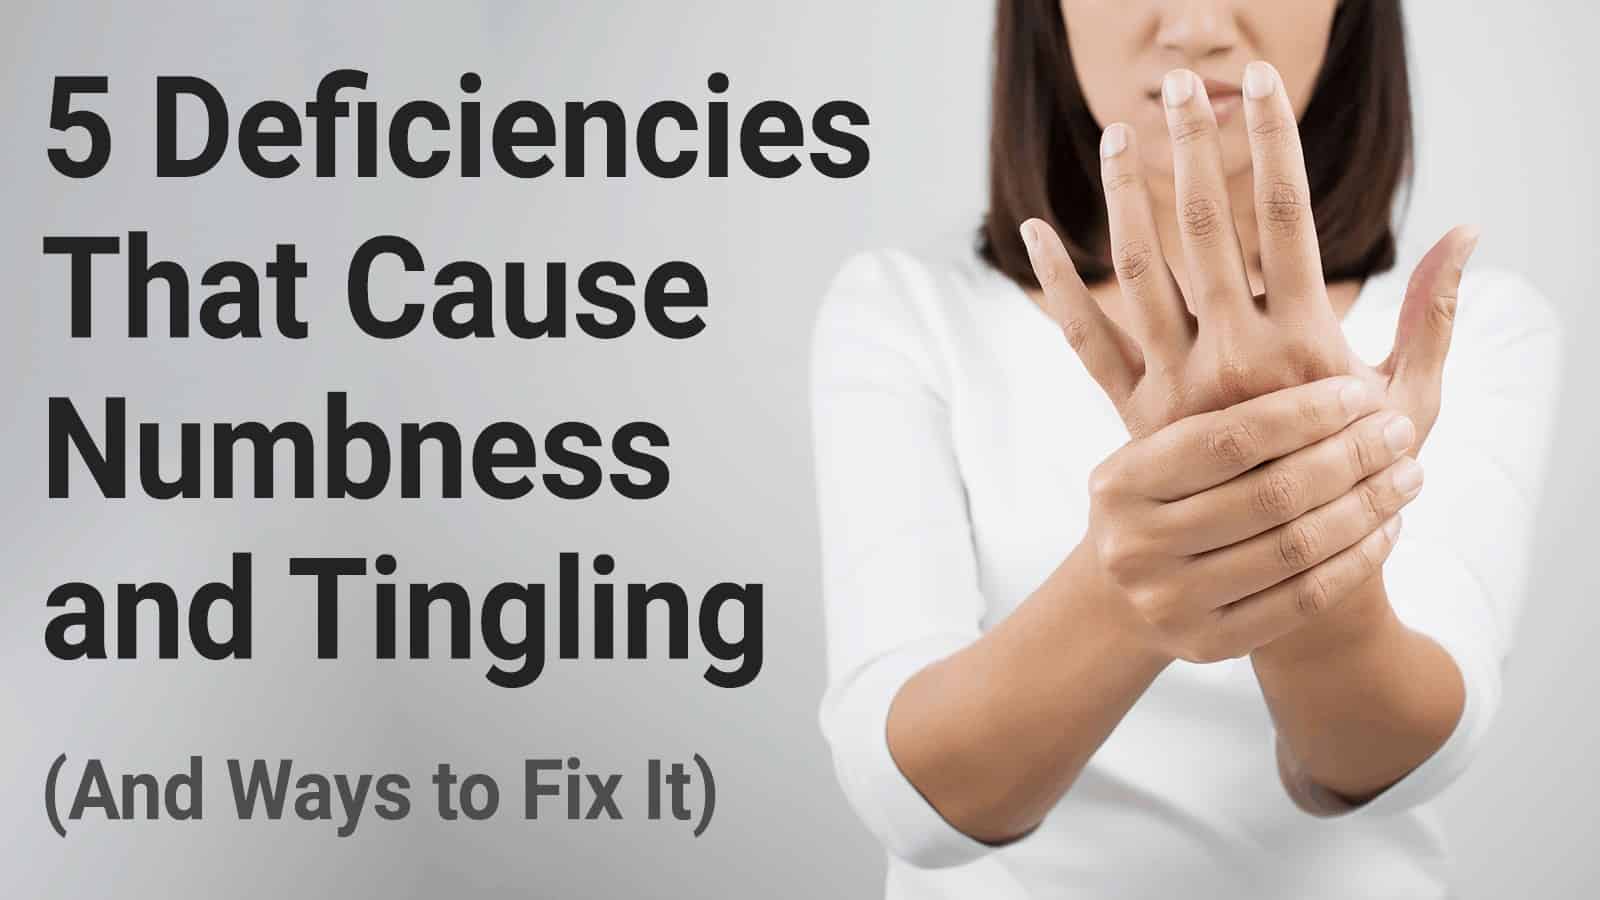 5 Deficiencies That Cause Numbness and Tingling